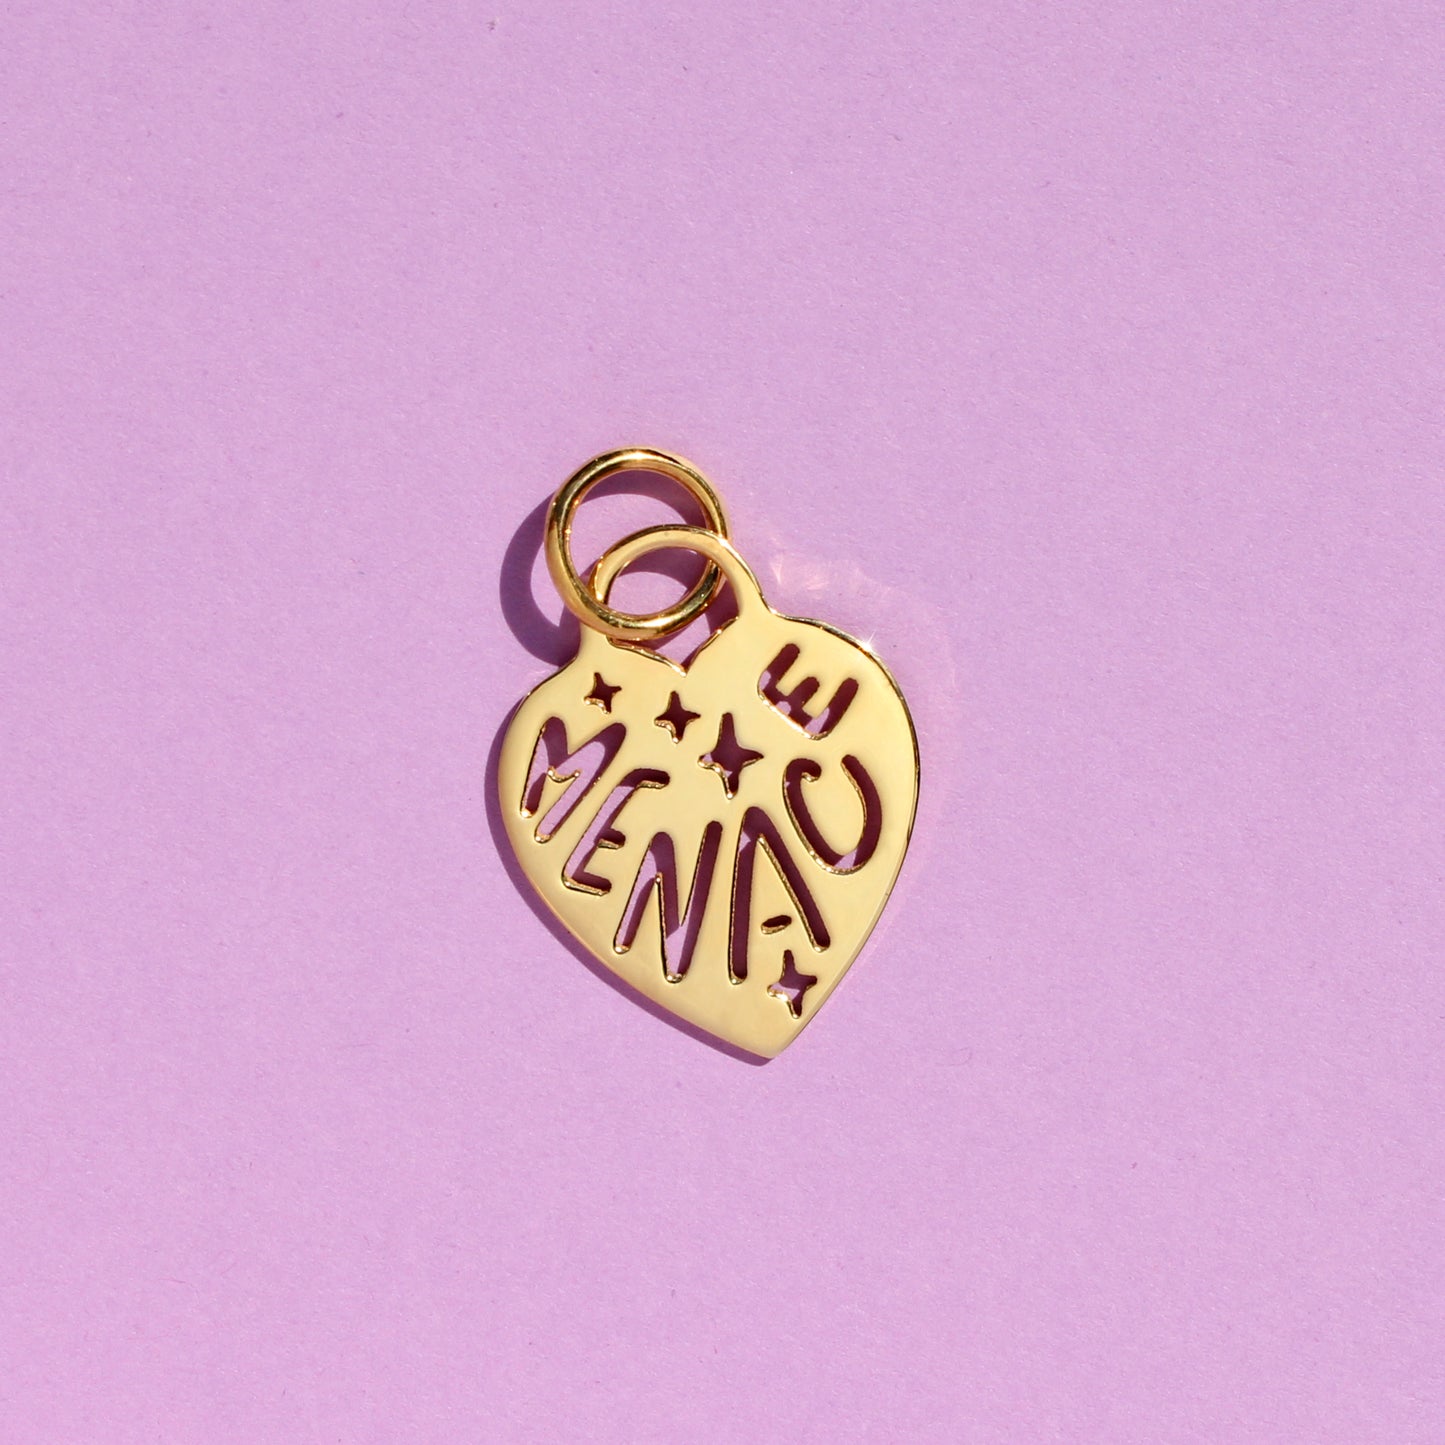 MENACE heart tag necklace